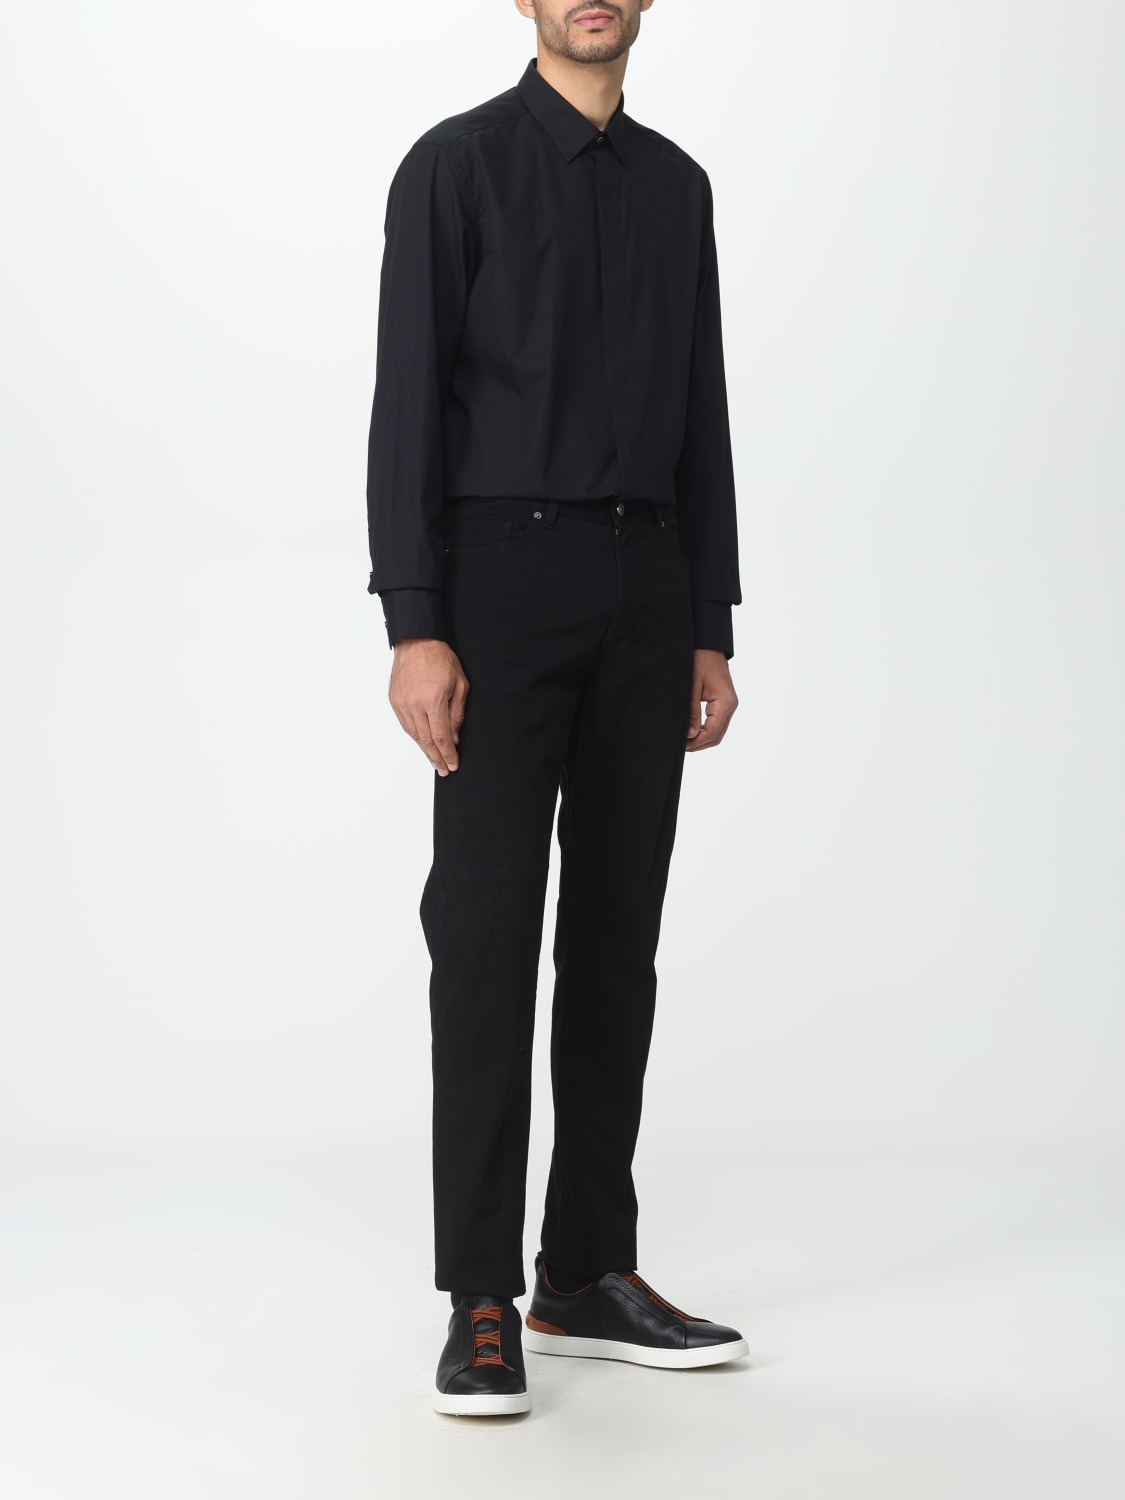 ZEGNA: pants for man - Black | Zegna pants CITYE8PZW online at GIGLIO.COM